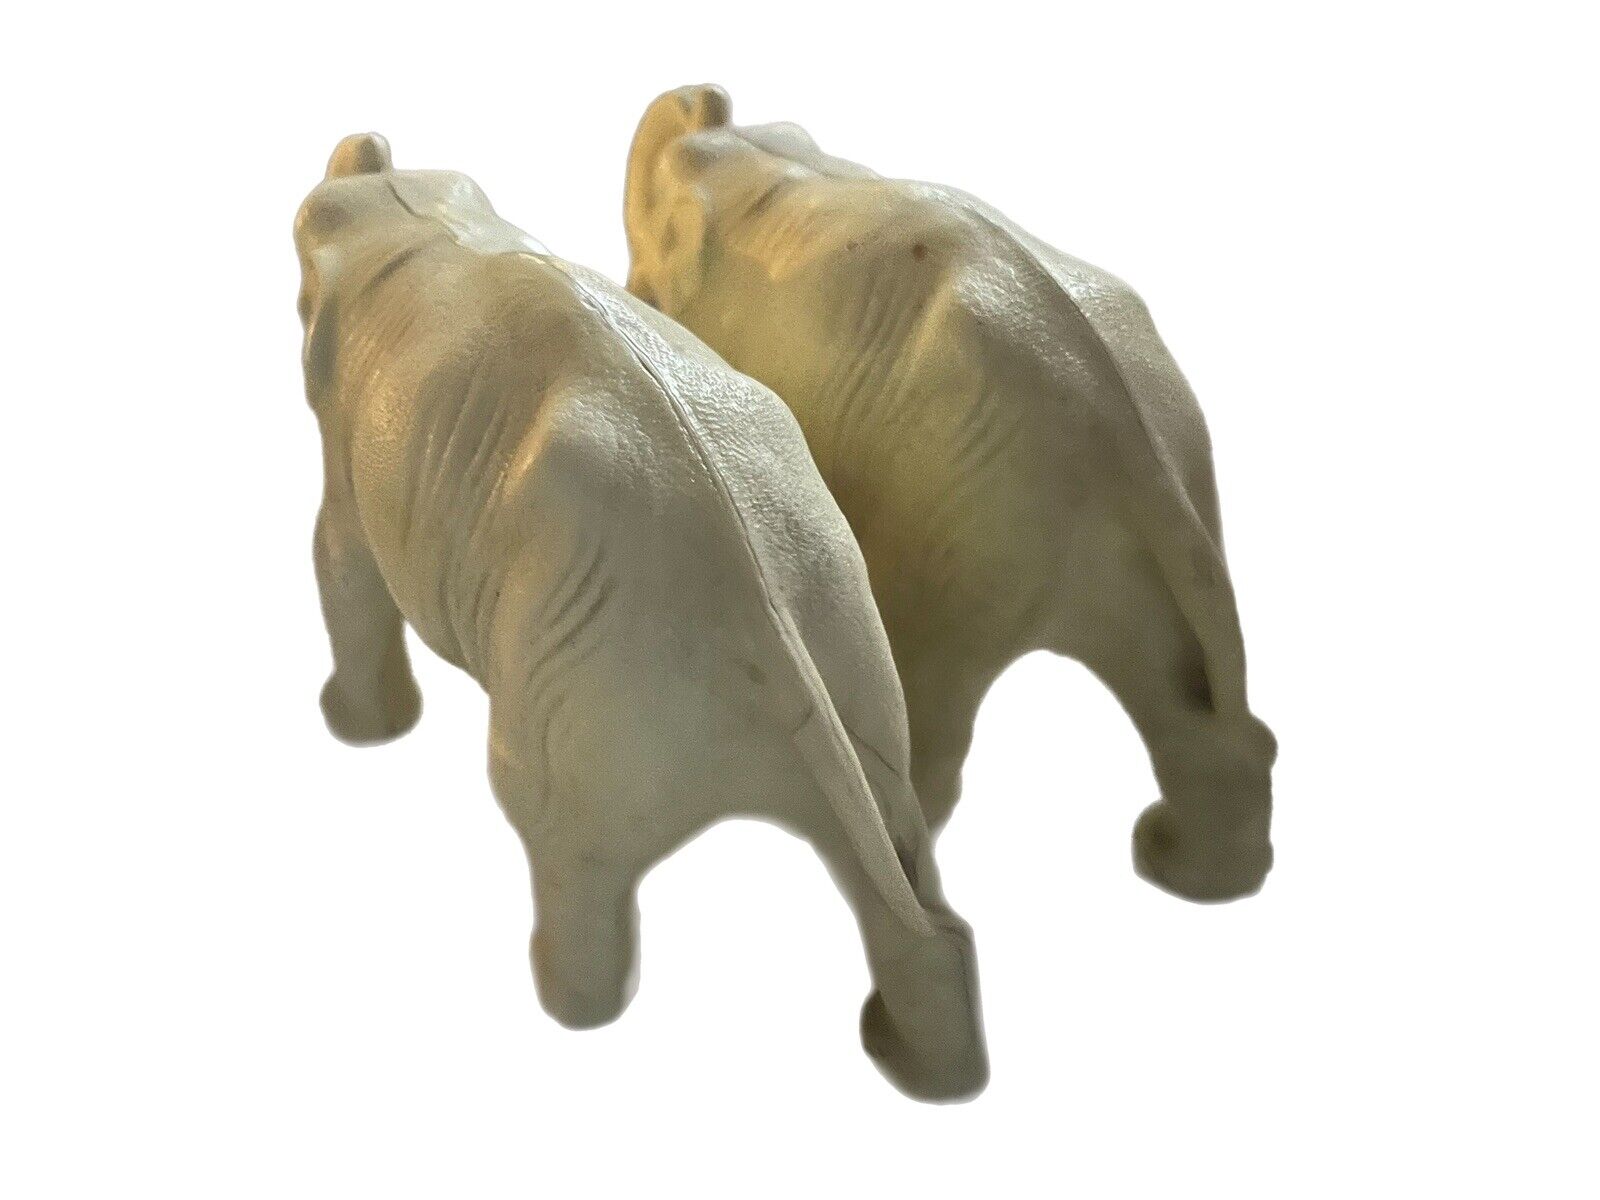 2 solid heavy hard rubber vintage elephants collectible gifts